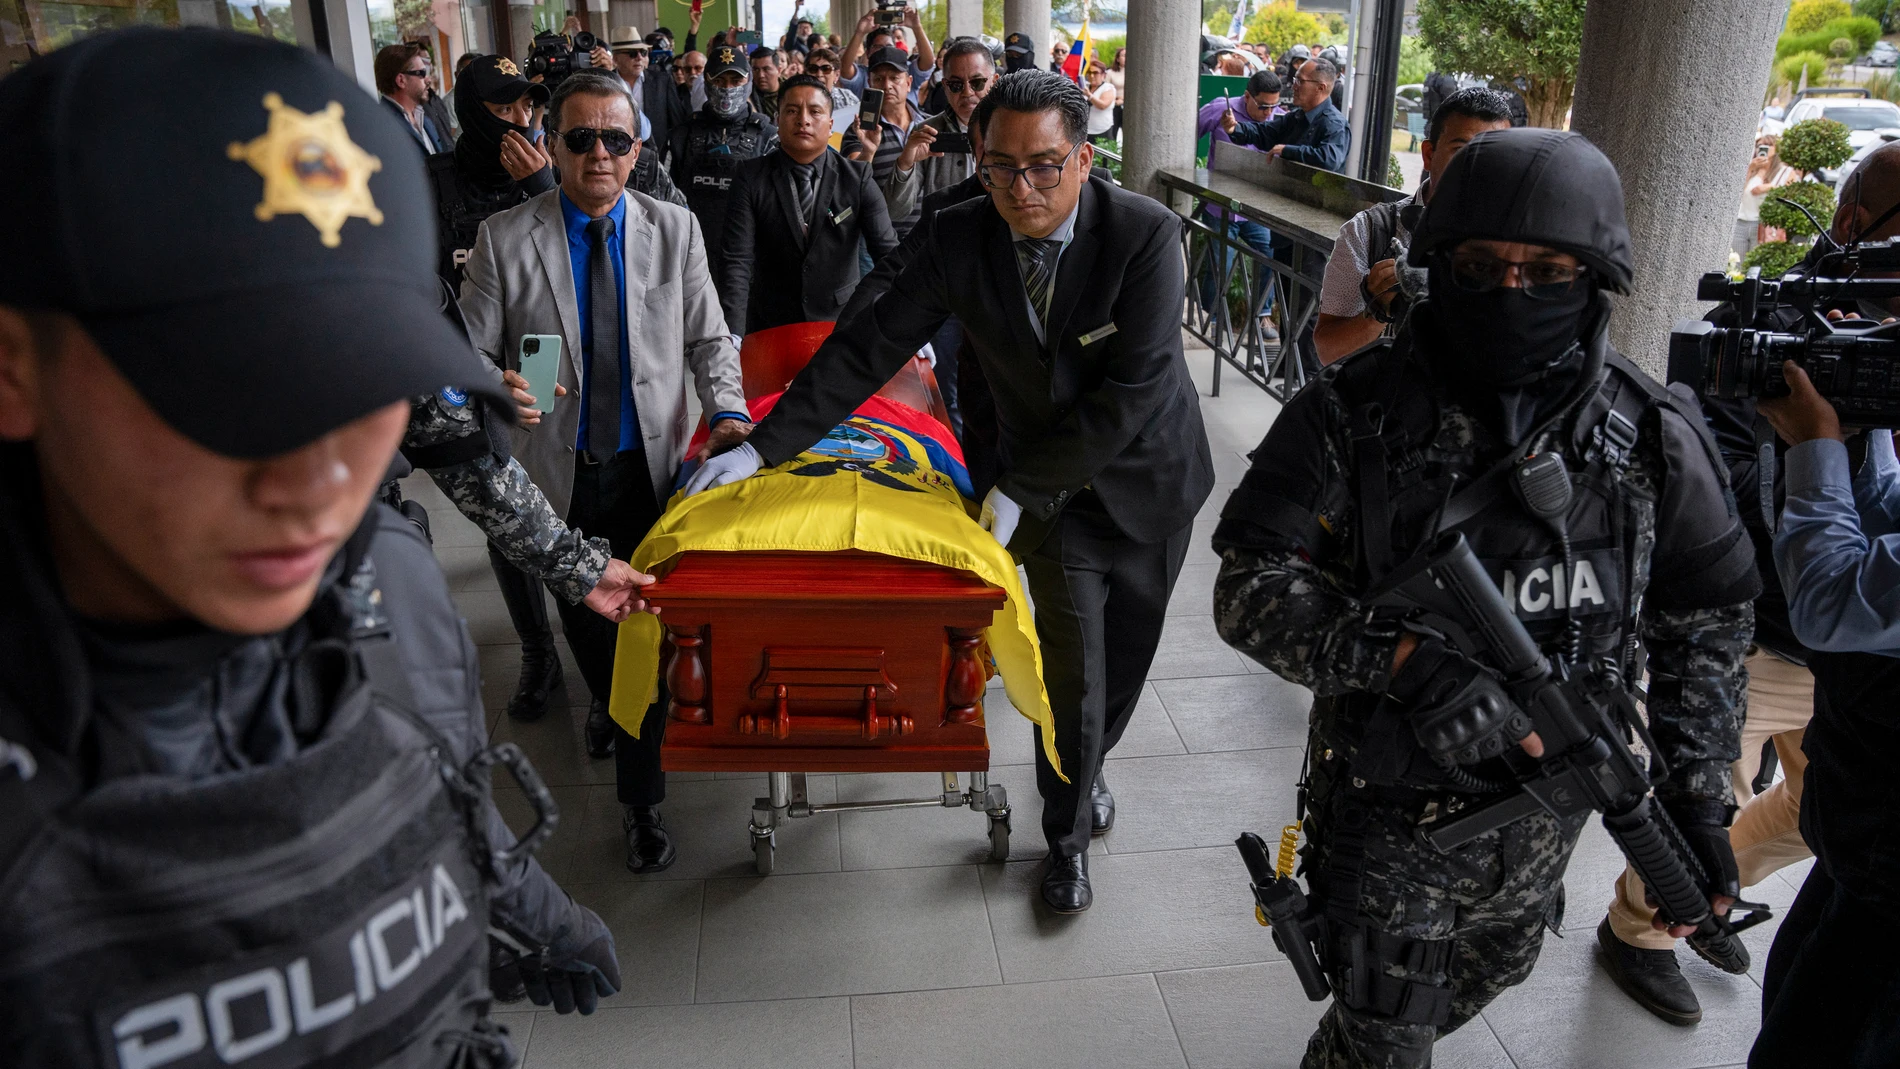 Relatives push the coffin of slain presidential candidate Fernando Villavicencio upon arrival to Camposanto Monteolivo cemetery for his burial in Quito, Ecuador, Friday, Aug. 11, 2023. The 59-year-old was fatally shot at a political rally on Aug. 9 in Quito. (AP Photo/Carlos Noriega)